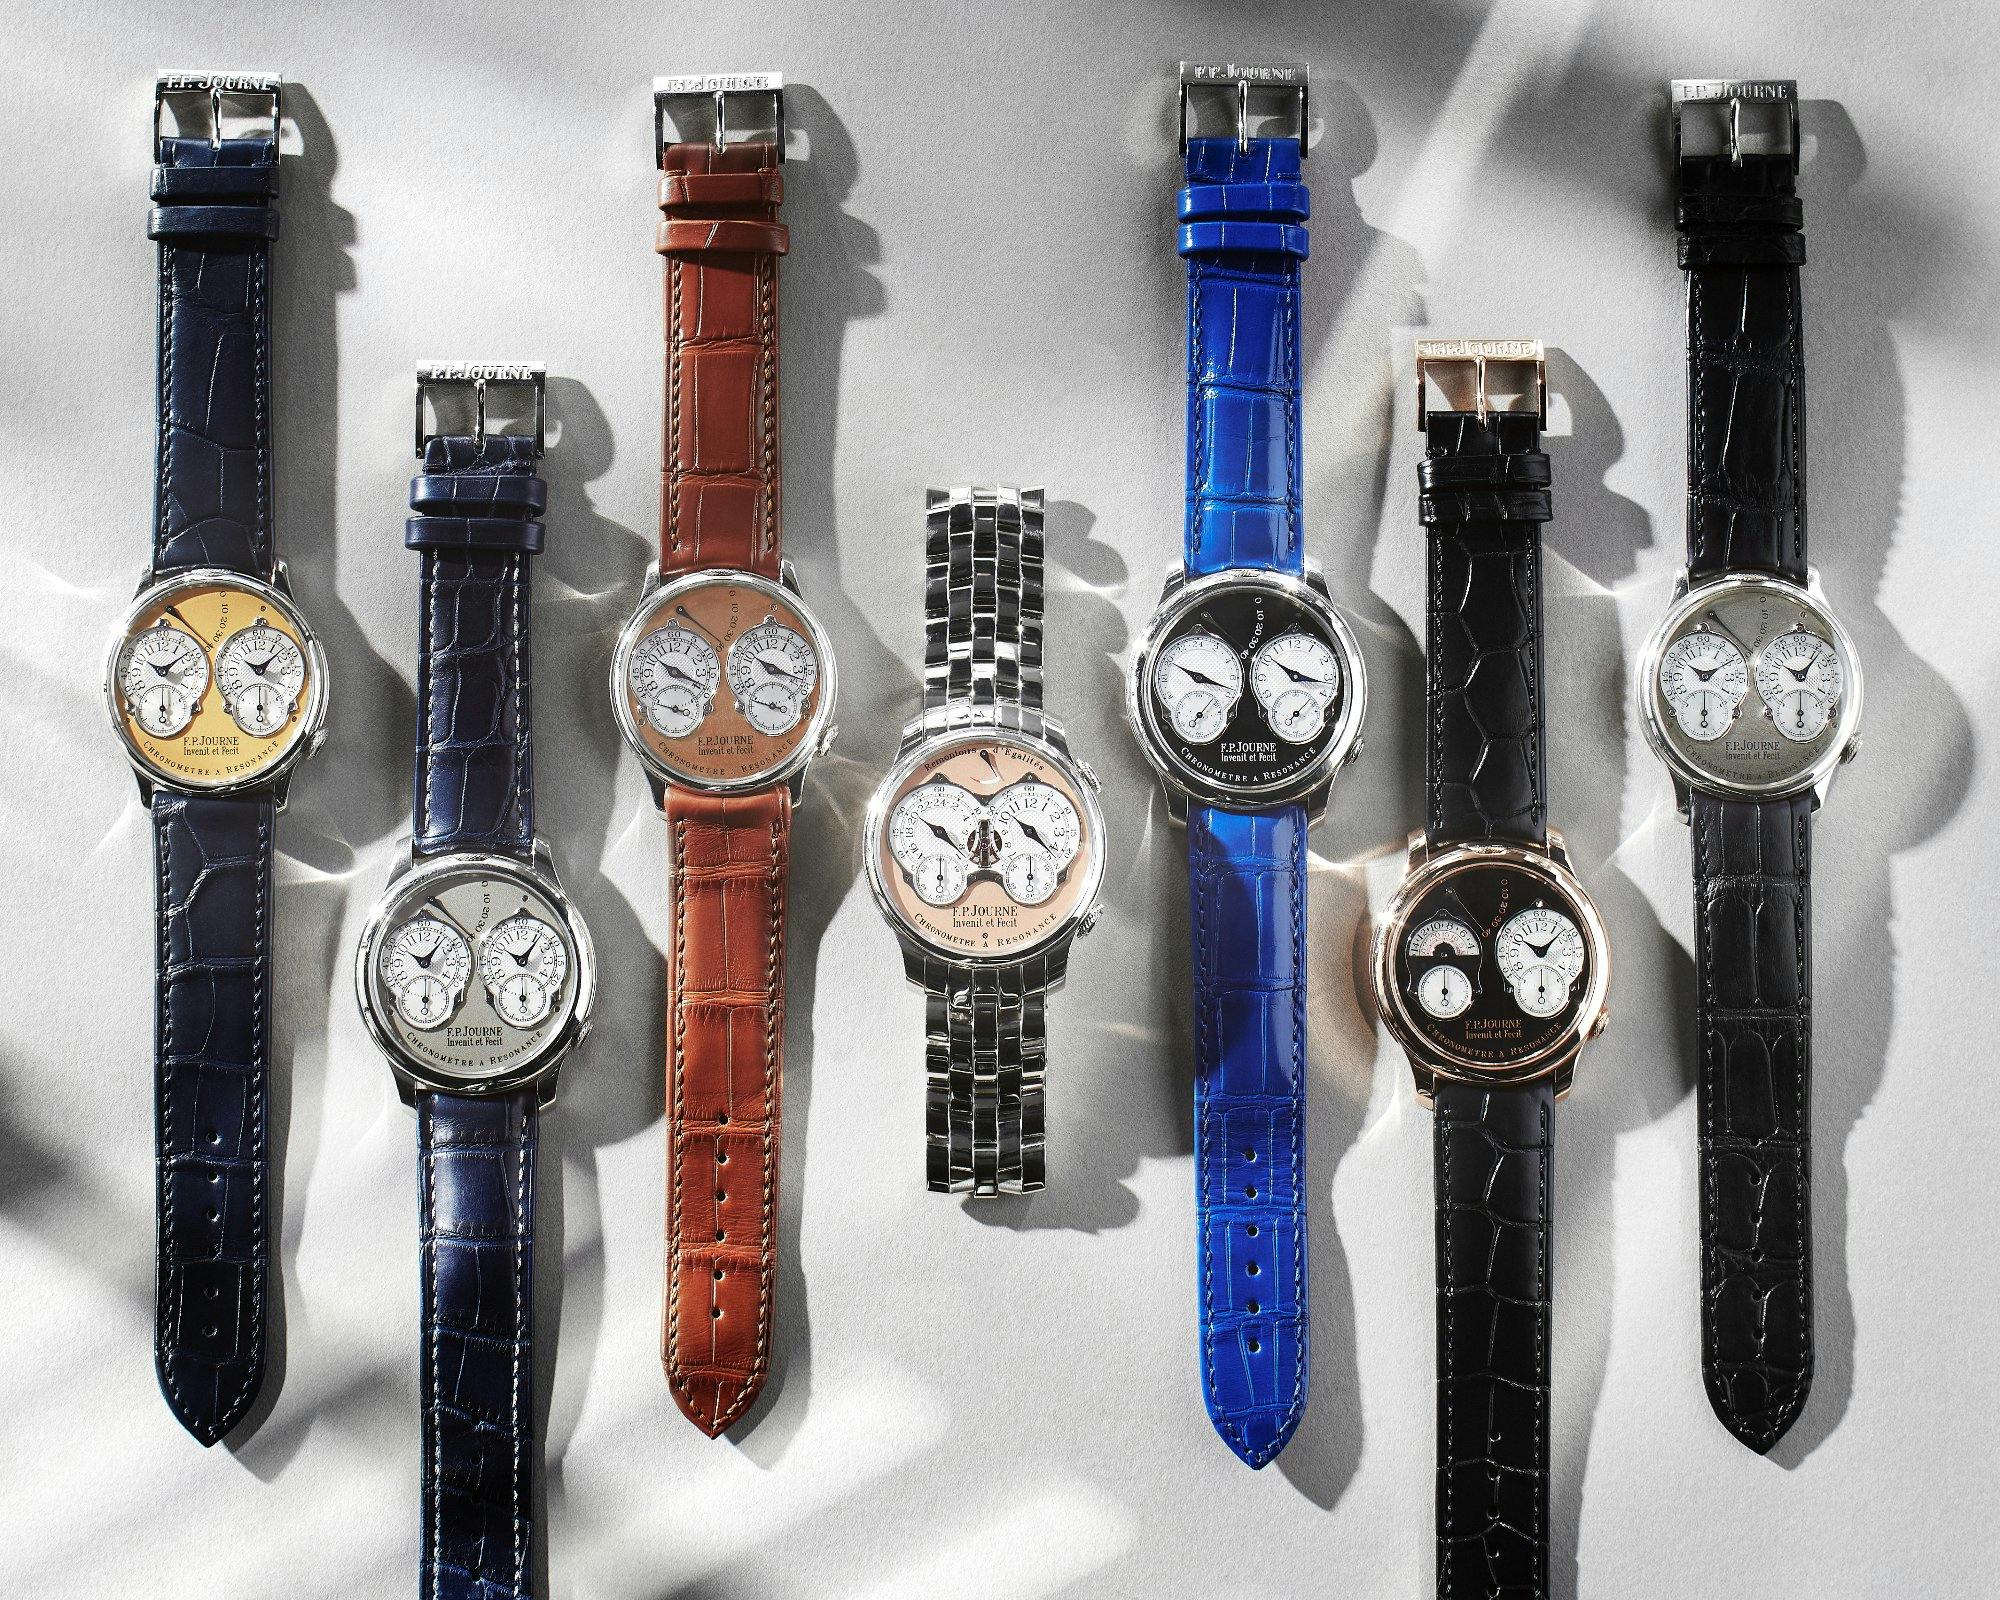 TIMELINE Vintage watch collection by Dan Henry | Vintage watches, Gruen  watches, Horology